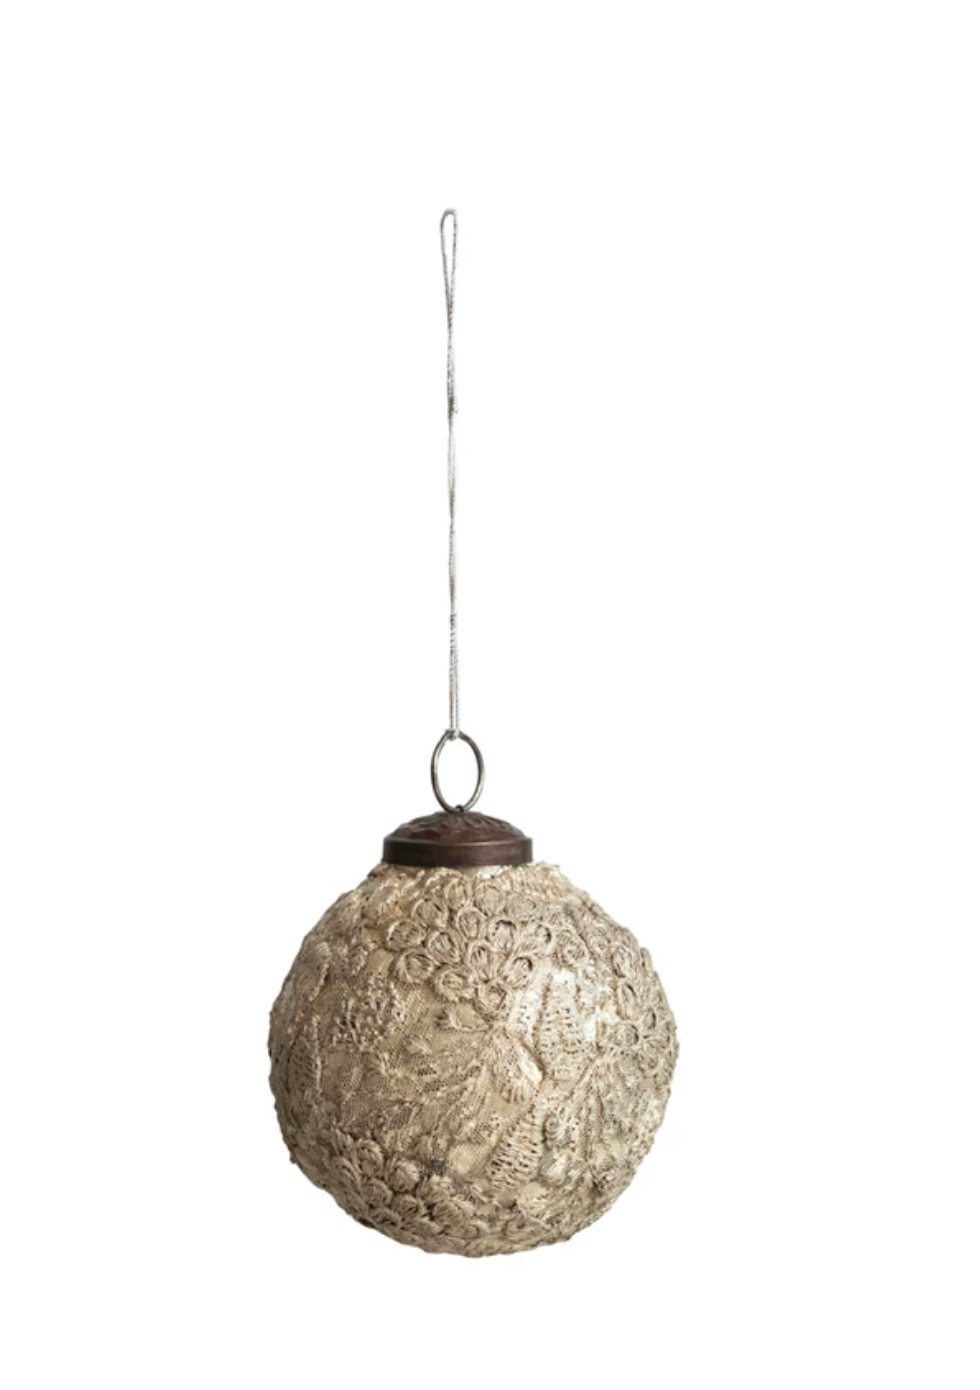 Round Glass Ball Ornament with Lace